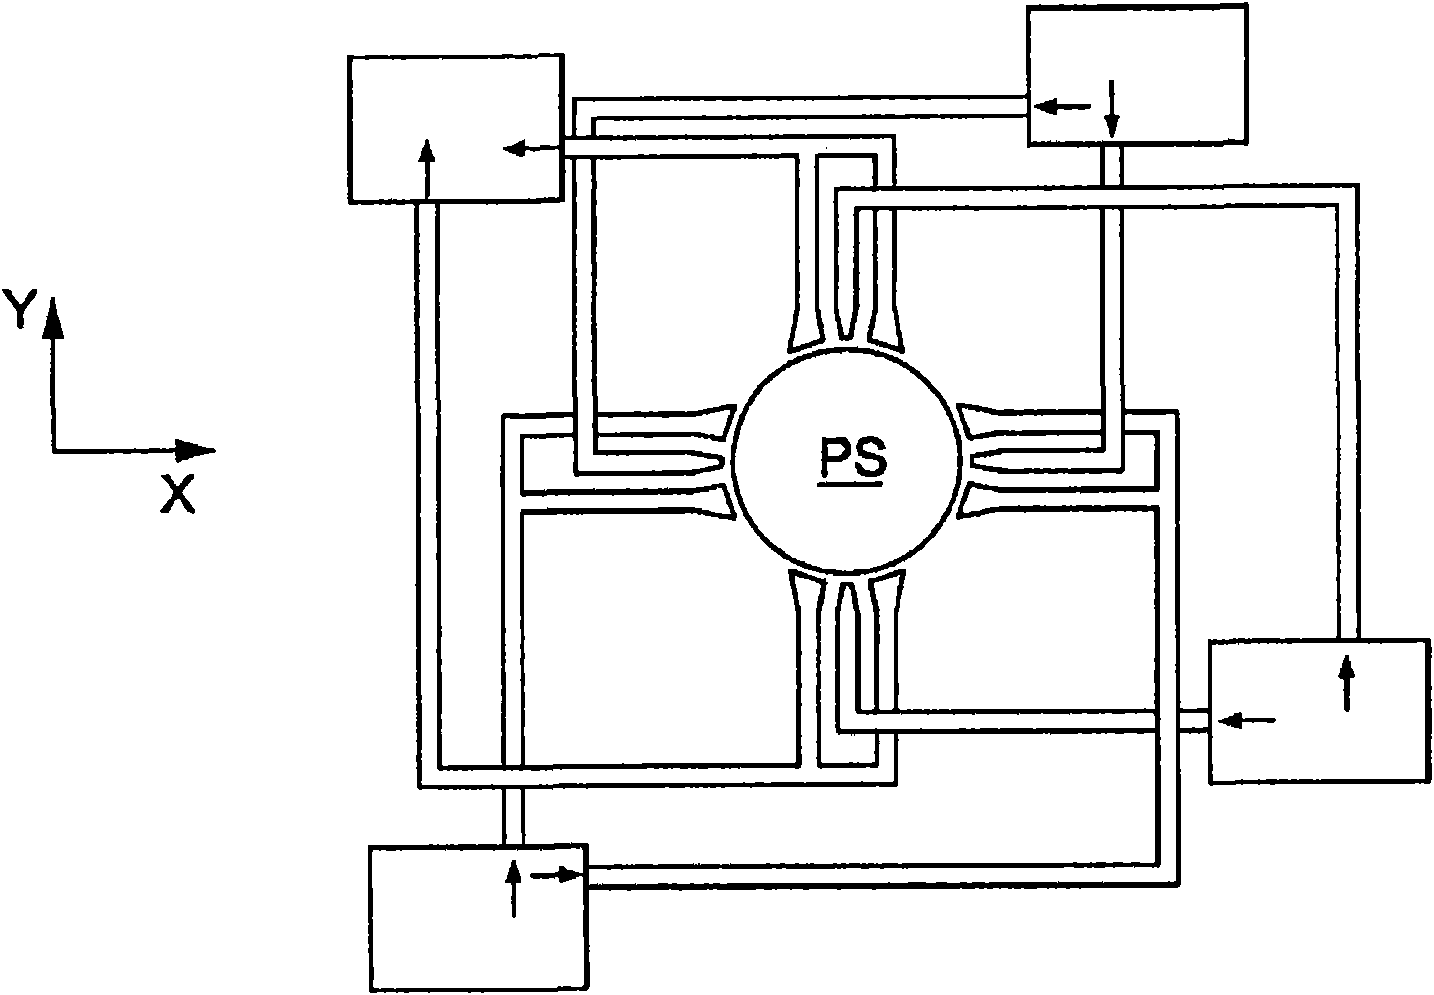 Sensor, table and lithographic apparatus